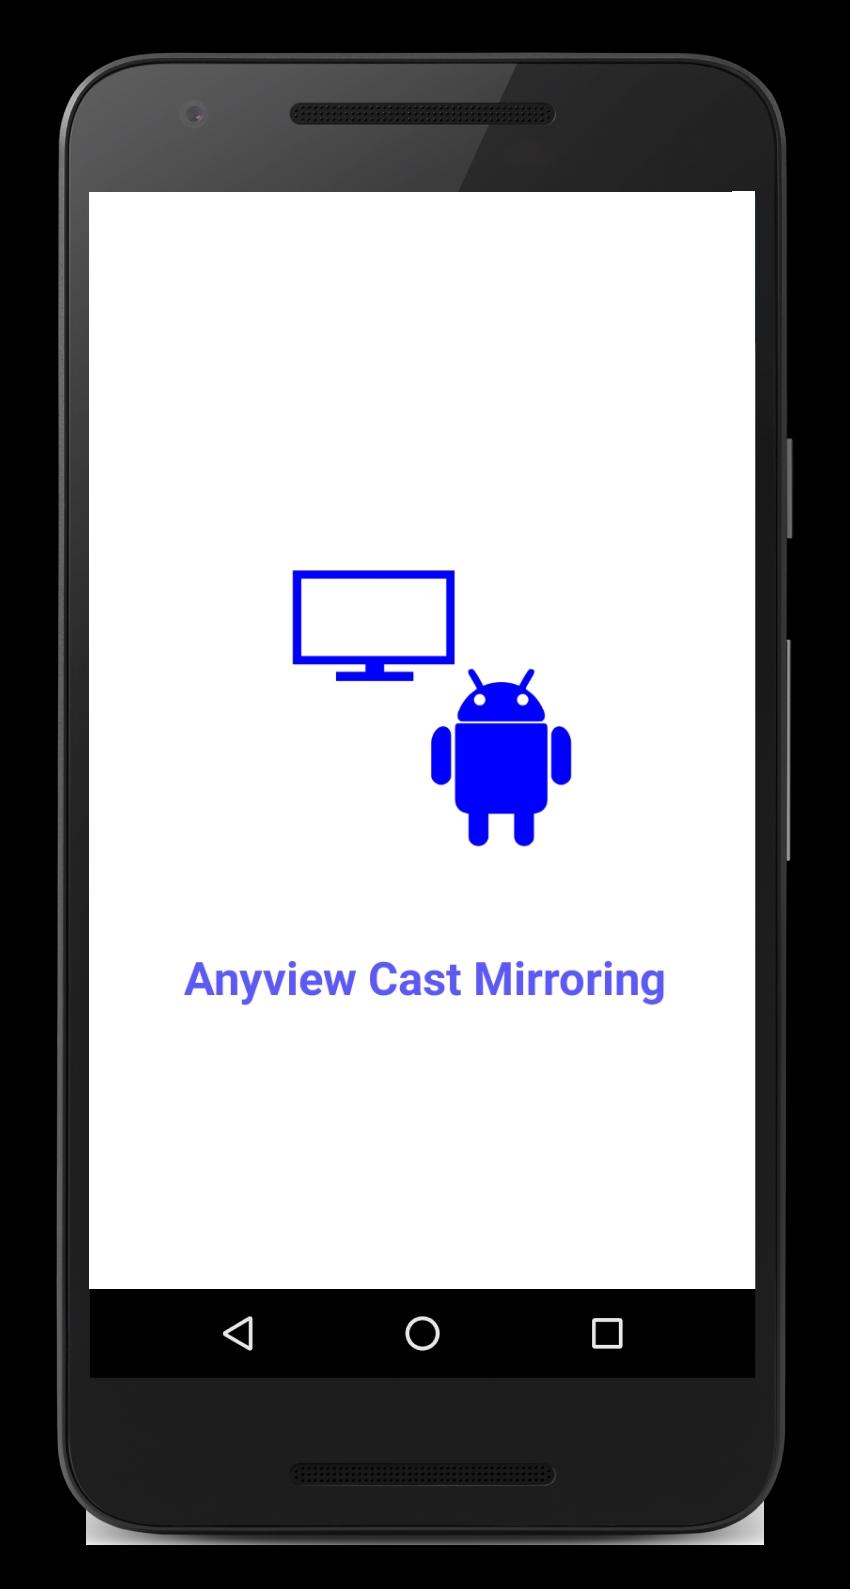 Anyview Cast Mirroring for Android - APK Download